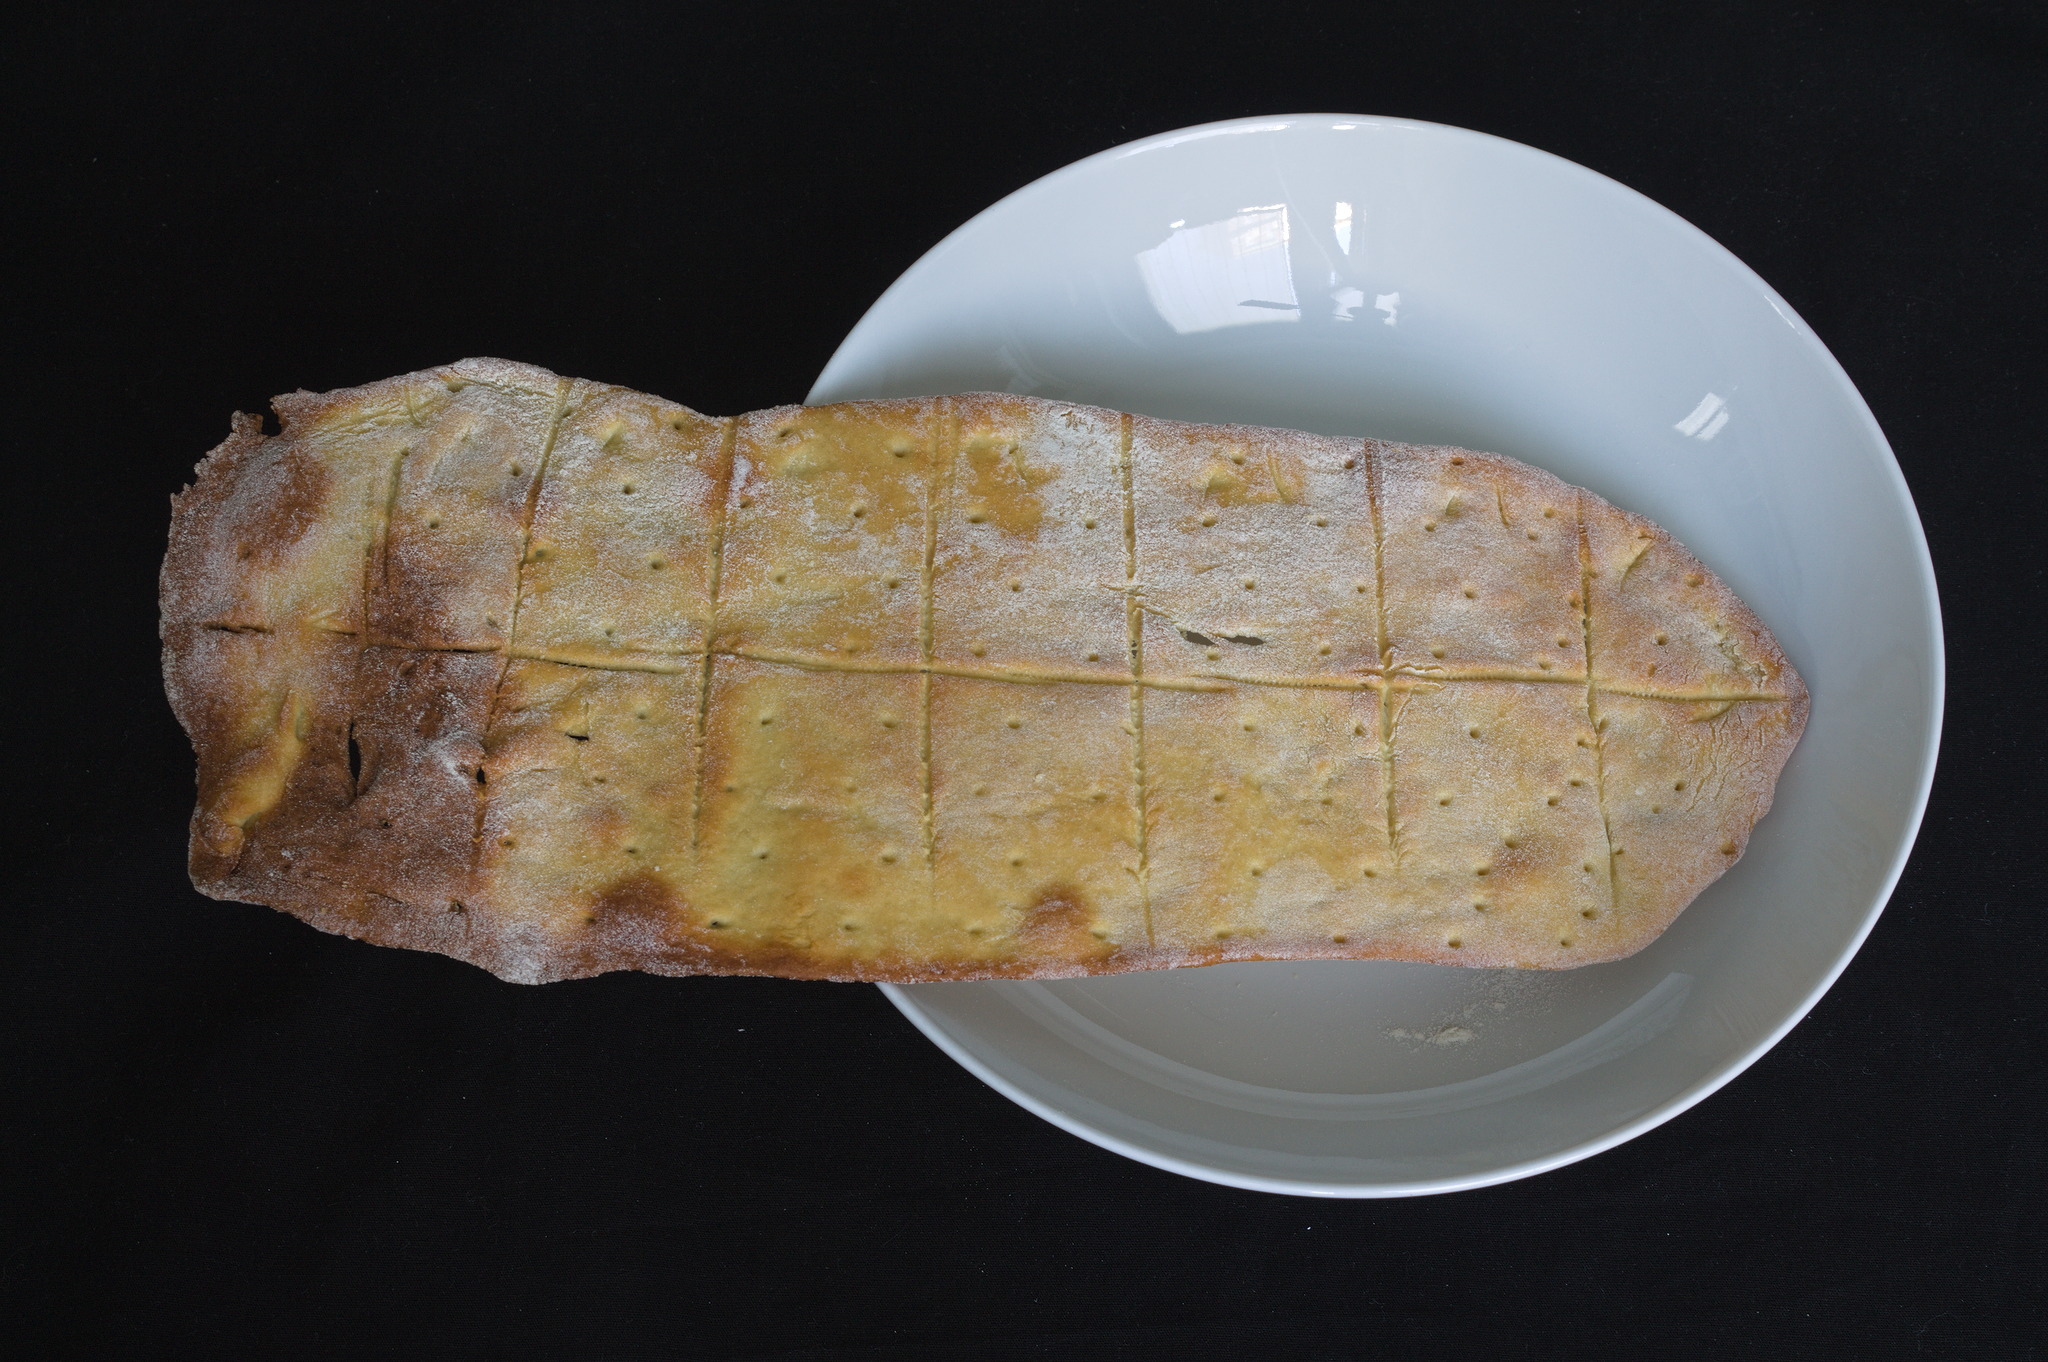 A flatbread, prescored into small portions, but still in one piece on top of a plate and overflowing to the side (it's about 10 cm × 30 cm or so). A side is thin and more browned, the other side is a bit thicker and paler.